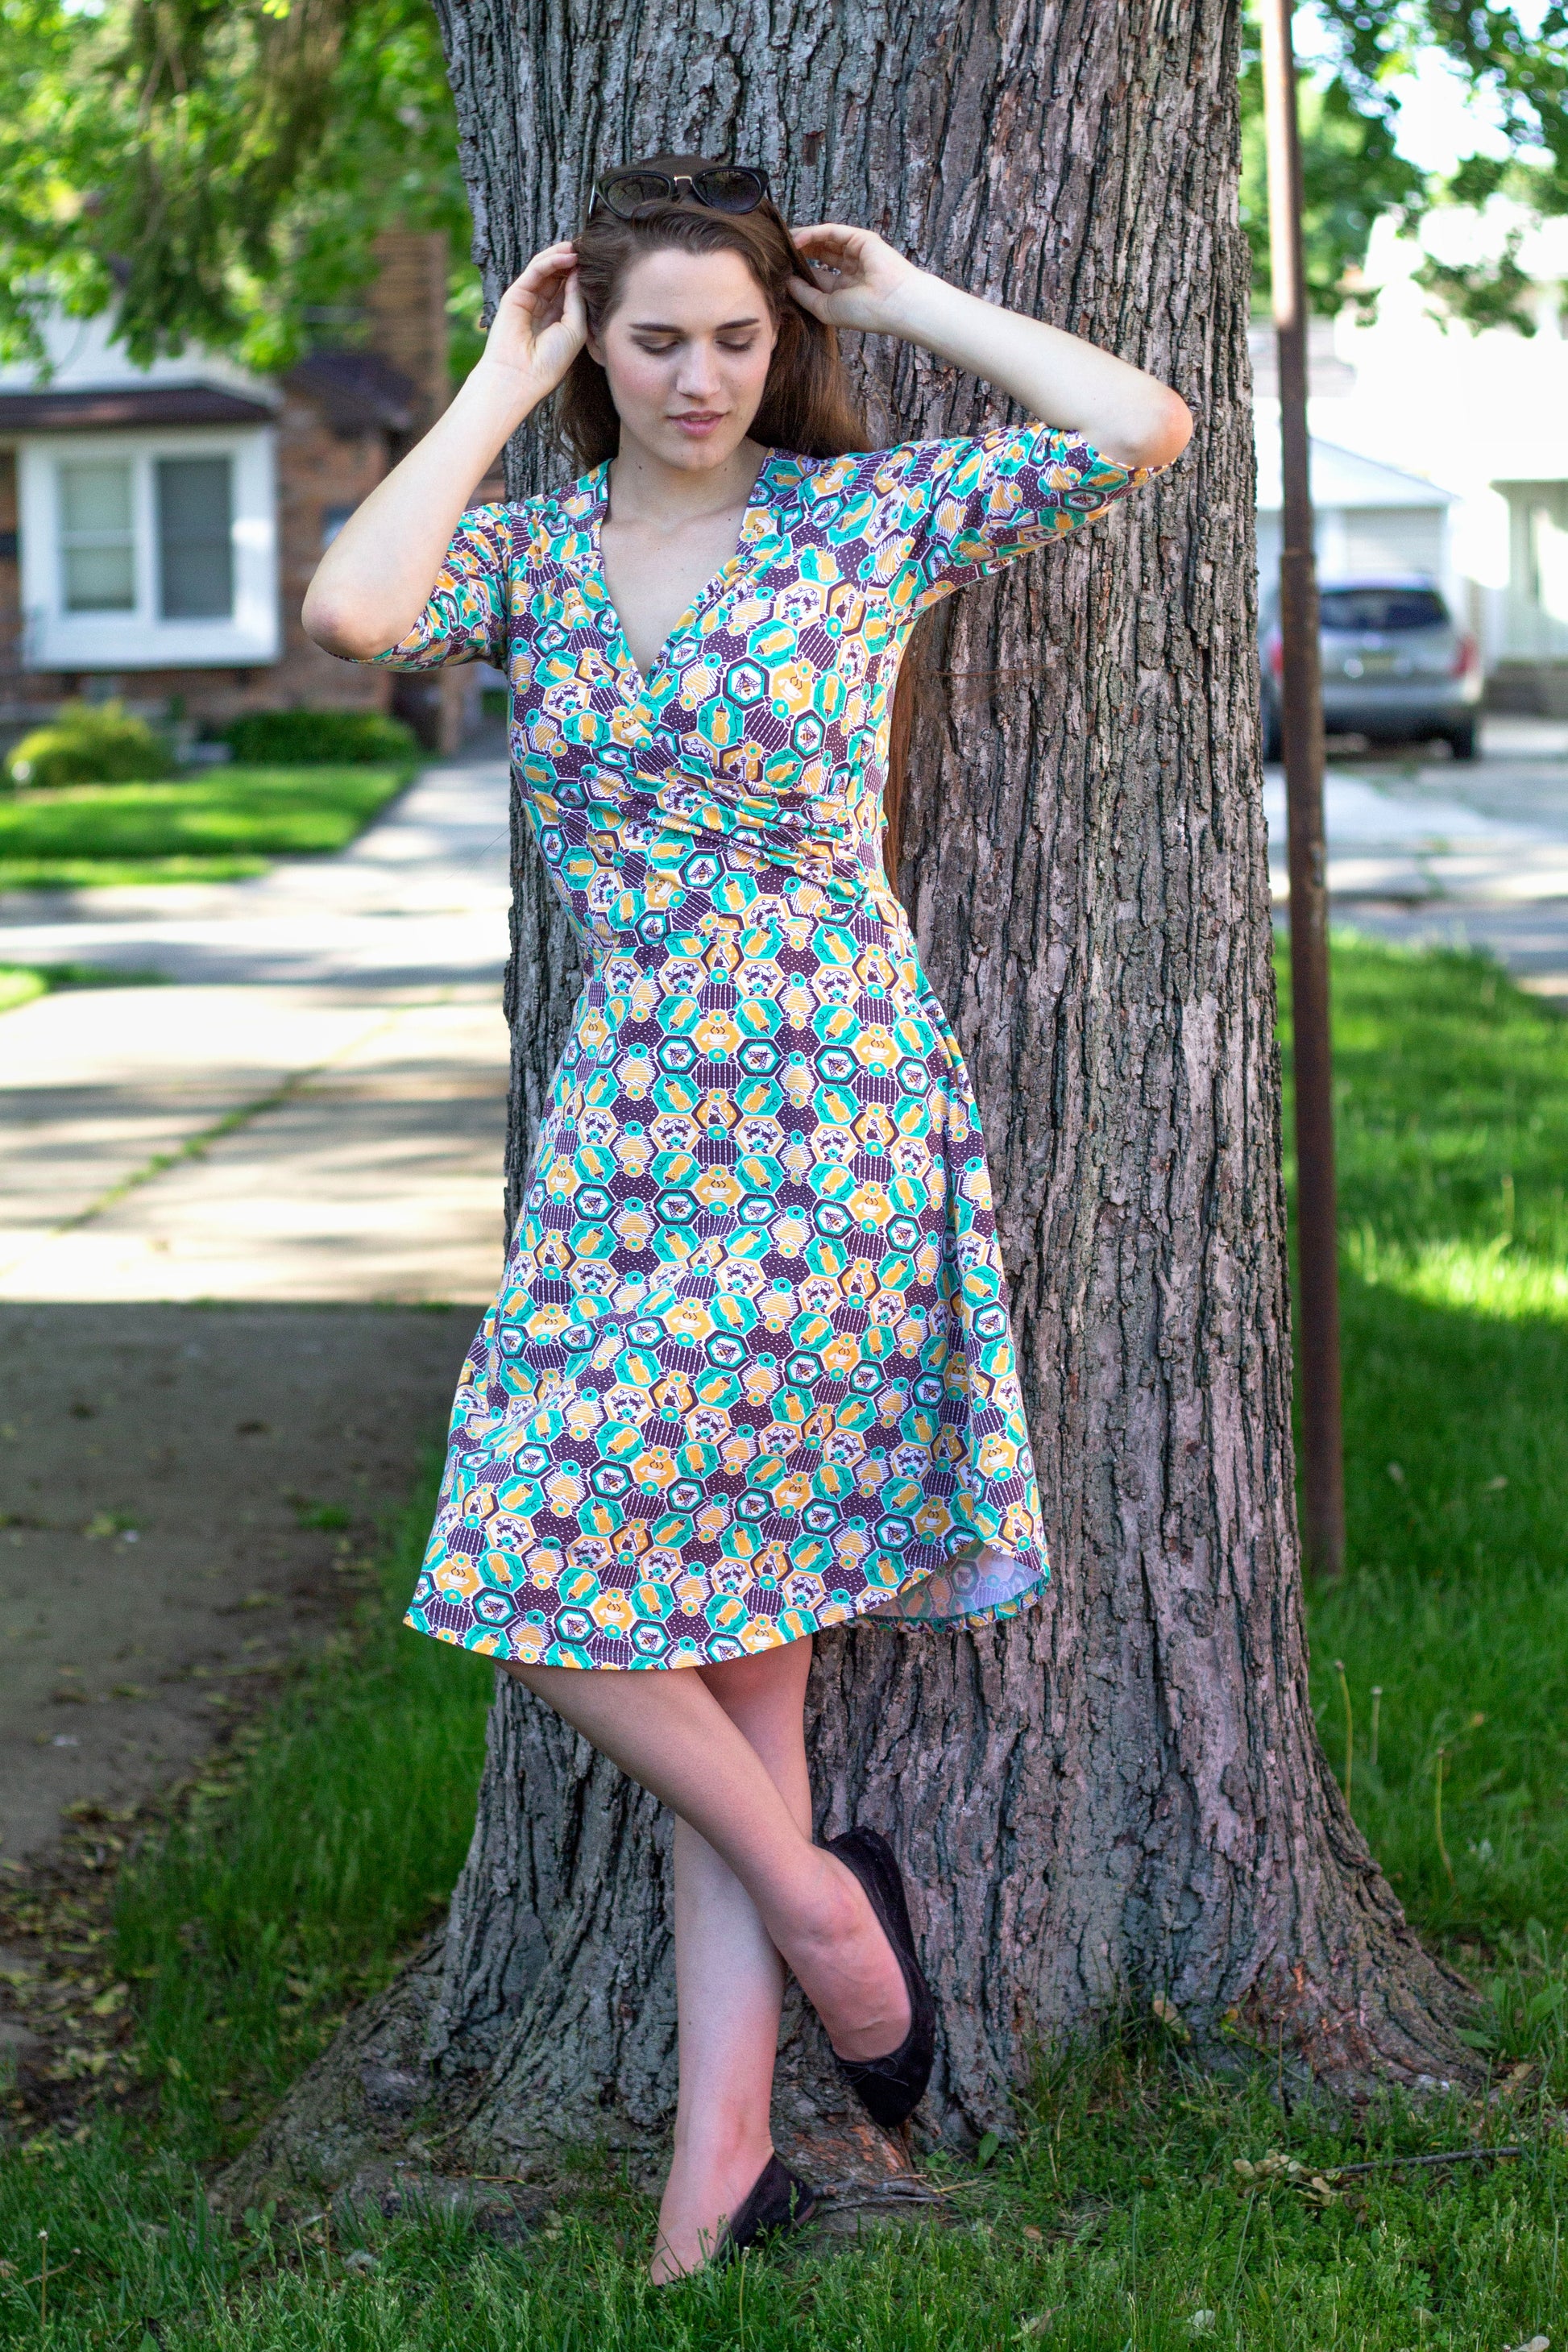 Brown-haired model wearing yellow, green and brown honeybee and hexagon print wrap dress in front of a tree